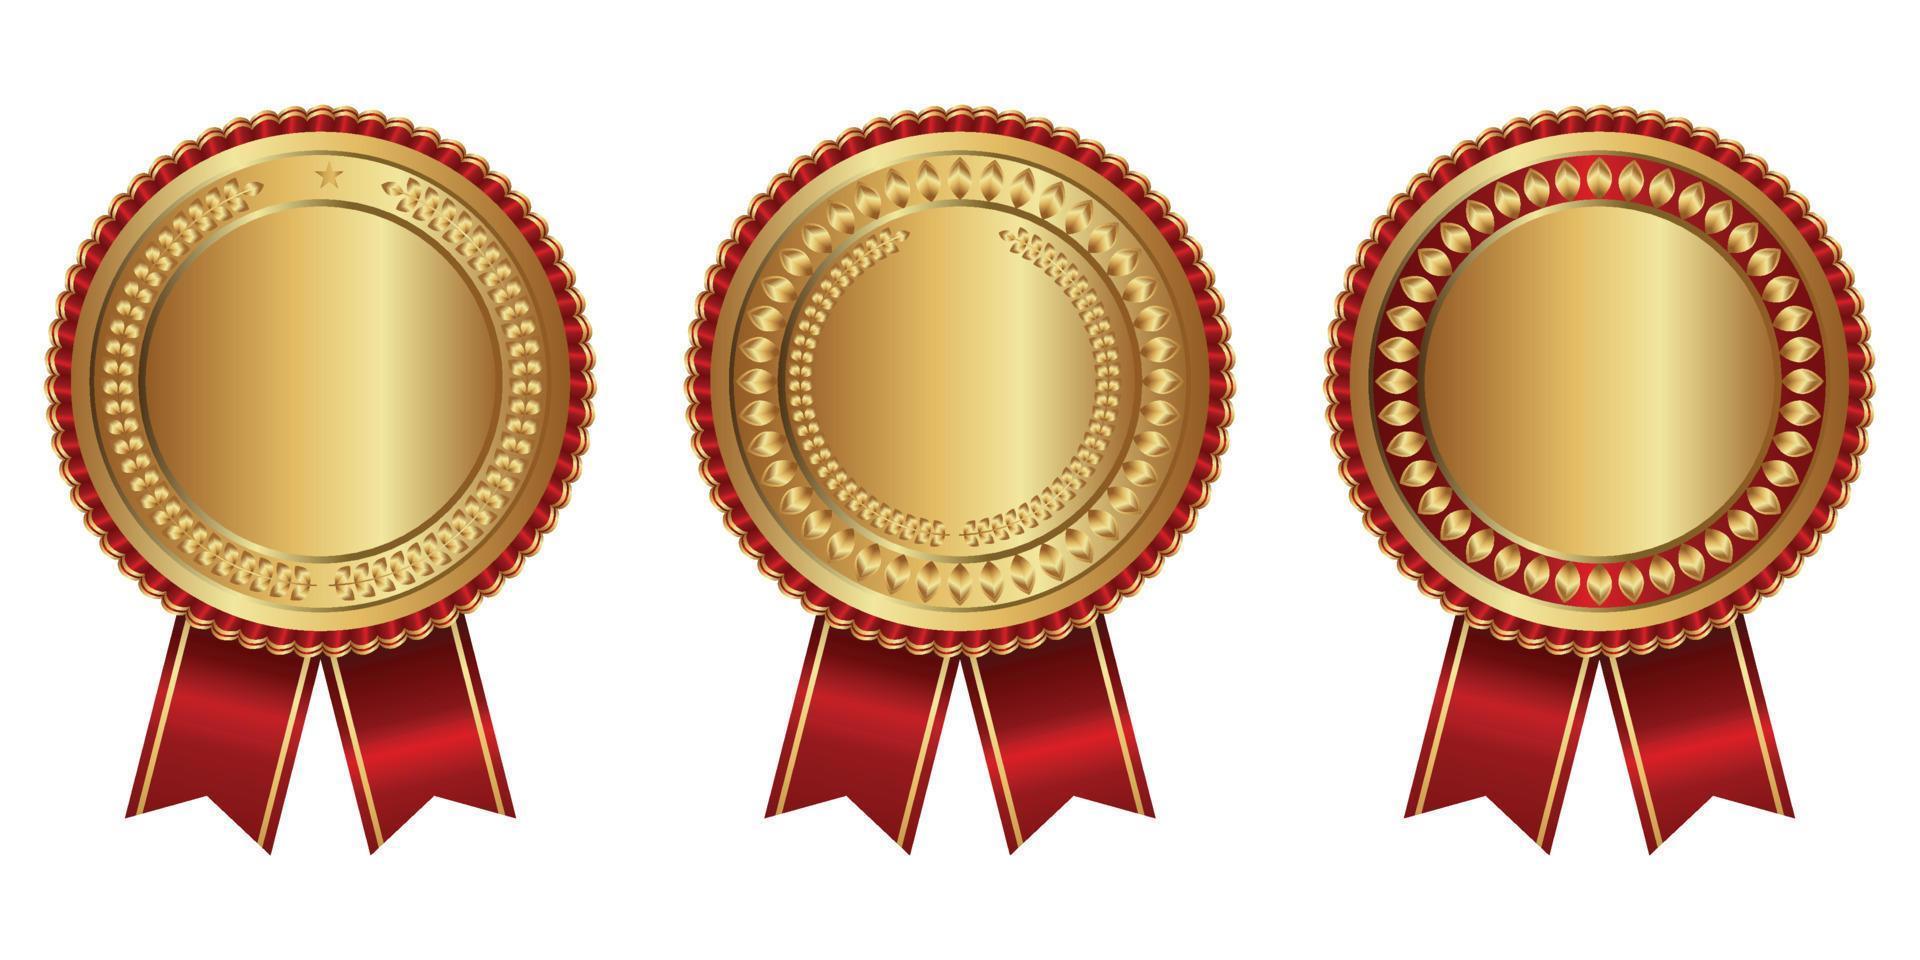 Set of realistic 3d Champion gold and red award trophy empty medals with ribbons for winner. Vector illustration